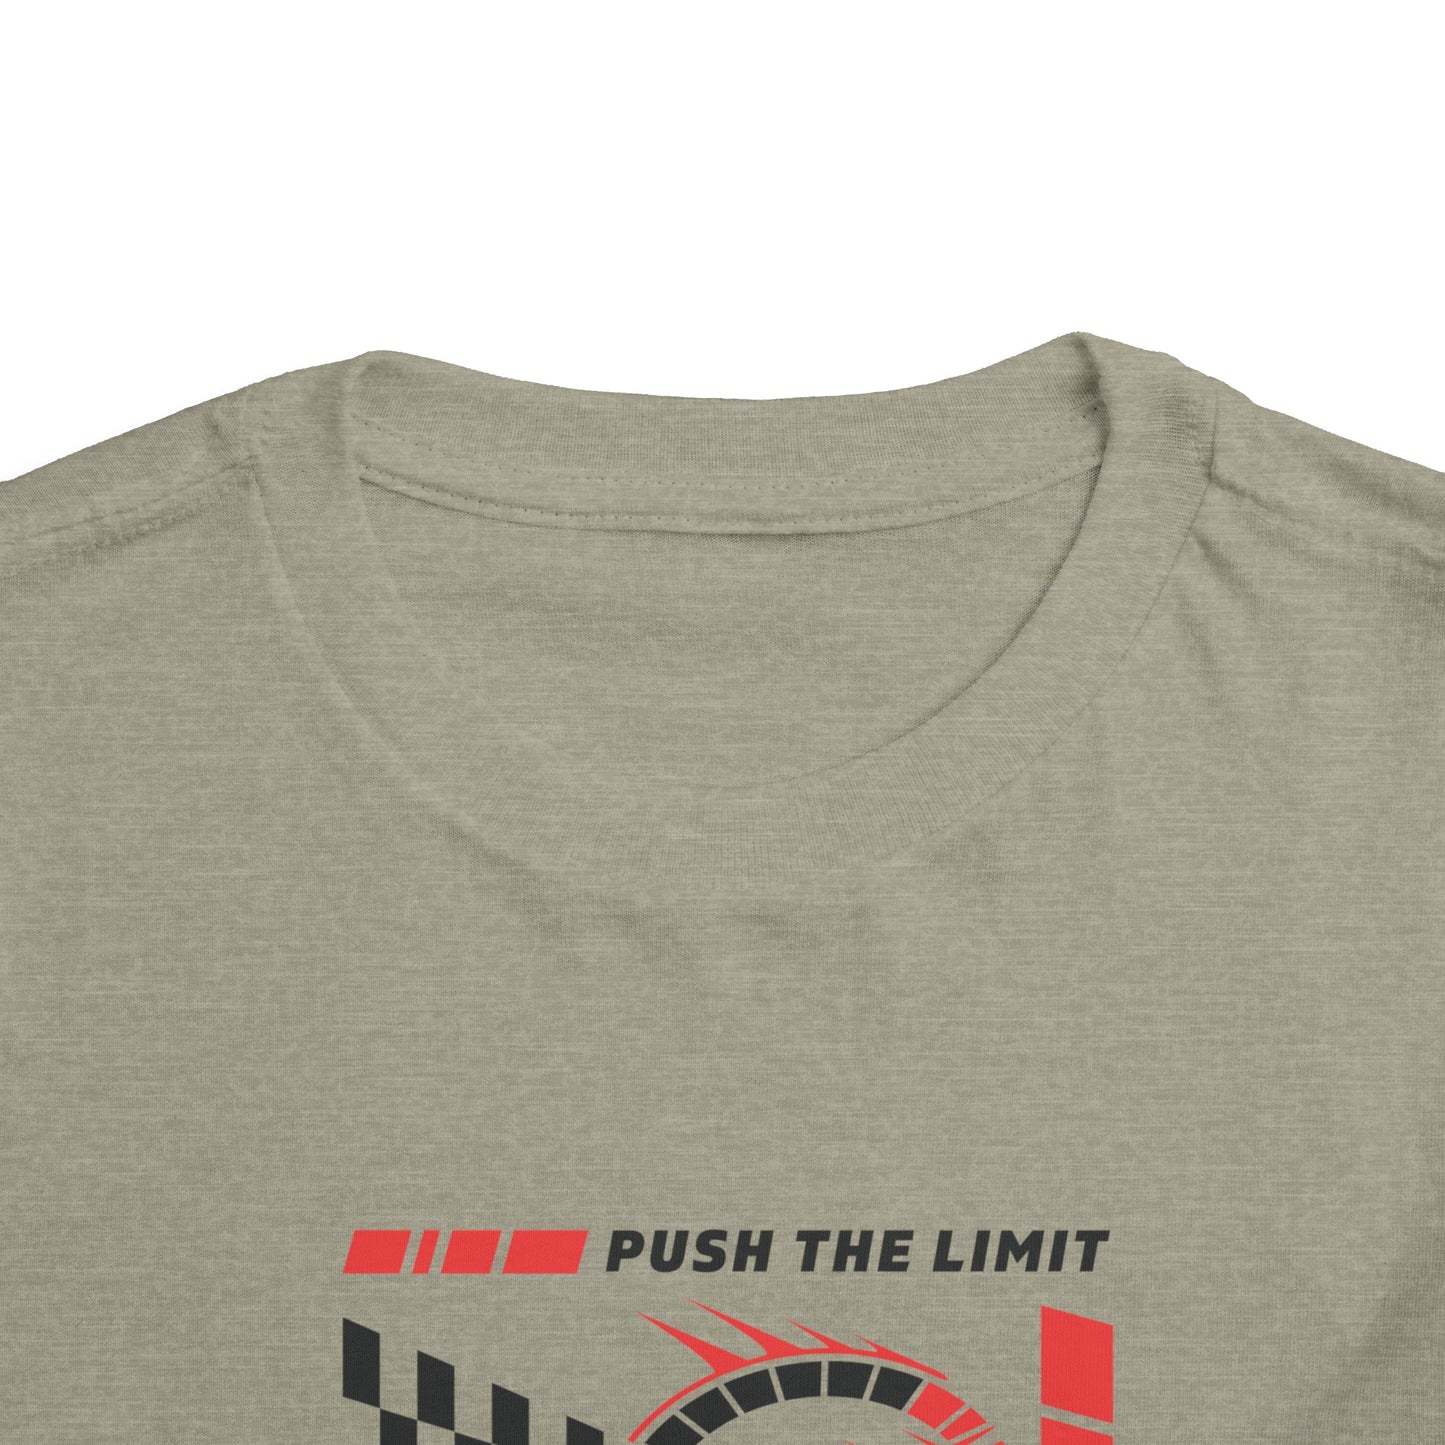 Pushing the limits Toddler Heather Tee - Soft Airlume Cotton, Comfortable & Stylish